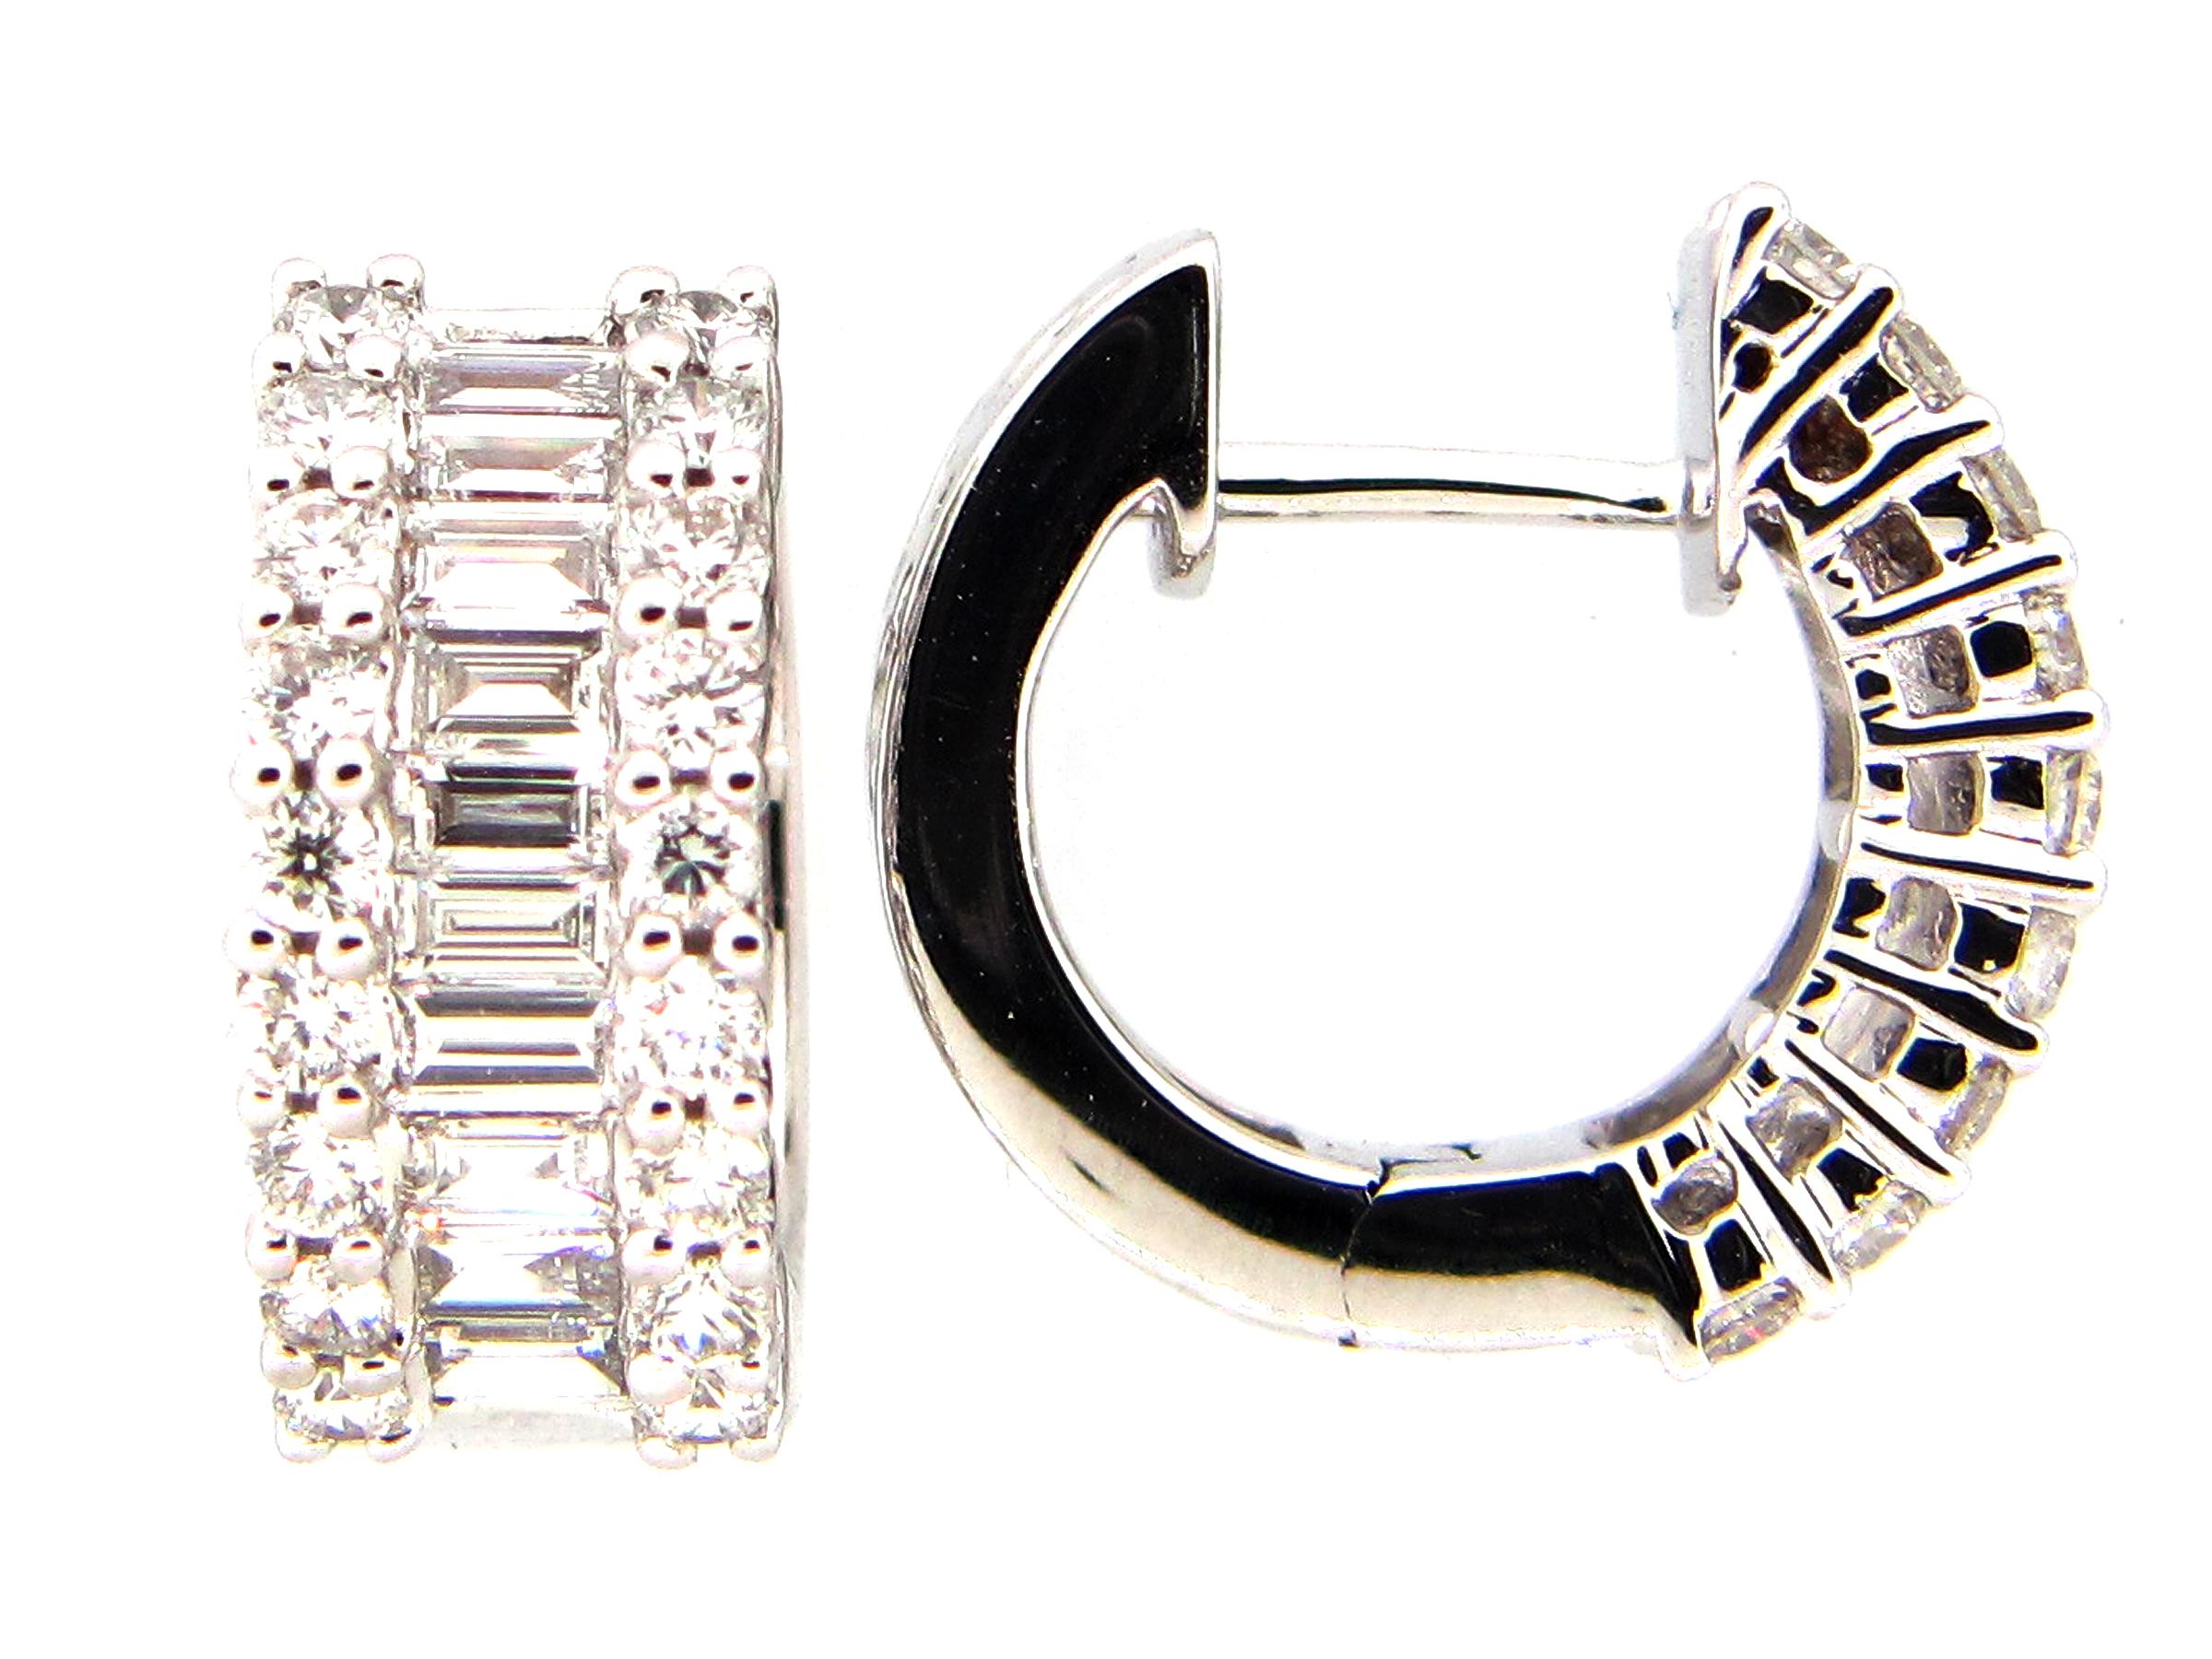 The Following Items we are offering is this Rare Important Radiant 18KT Gold Gorgeous Glittering and Sparkling Magnificent Fancy Baguette White Diamond Huggie Hoop Earrings. Earrings contain approx 1.50CTS of Beautiful Fancy Glittering Diamonds!!!